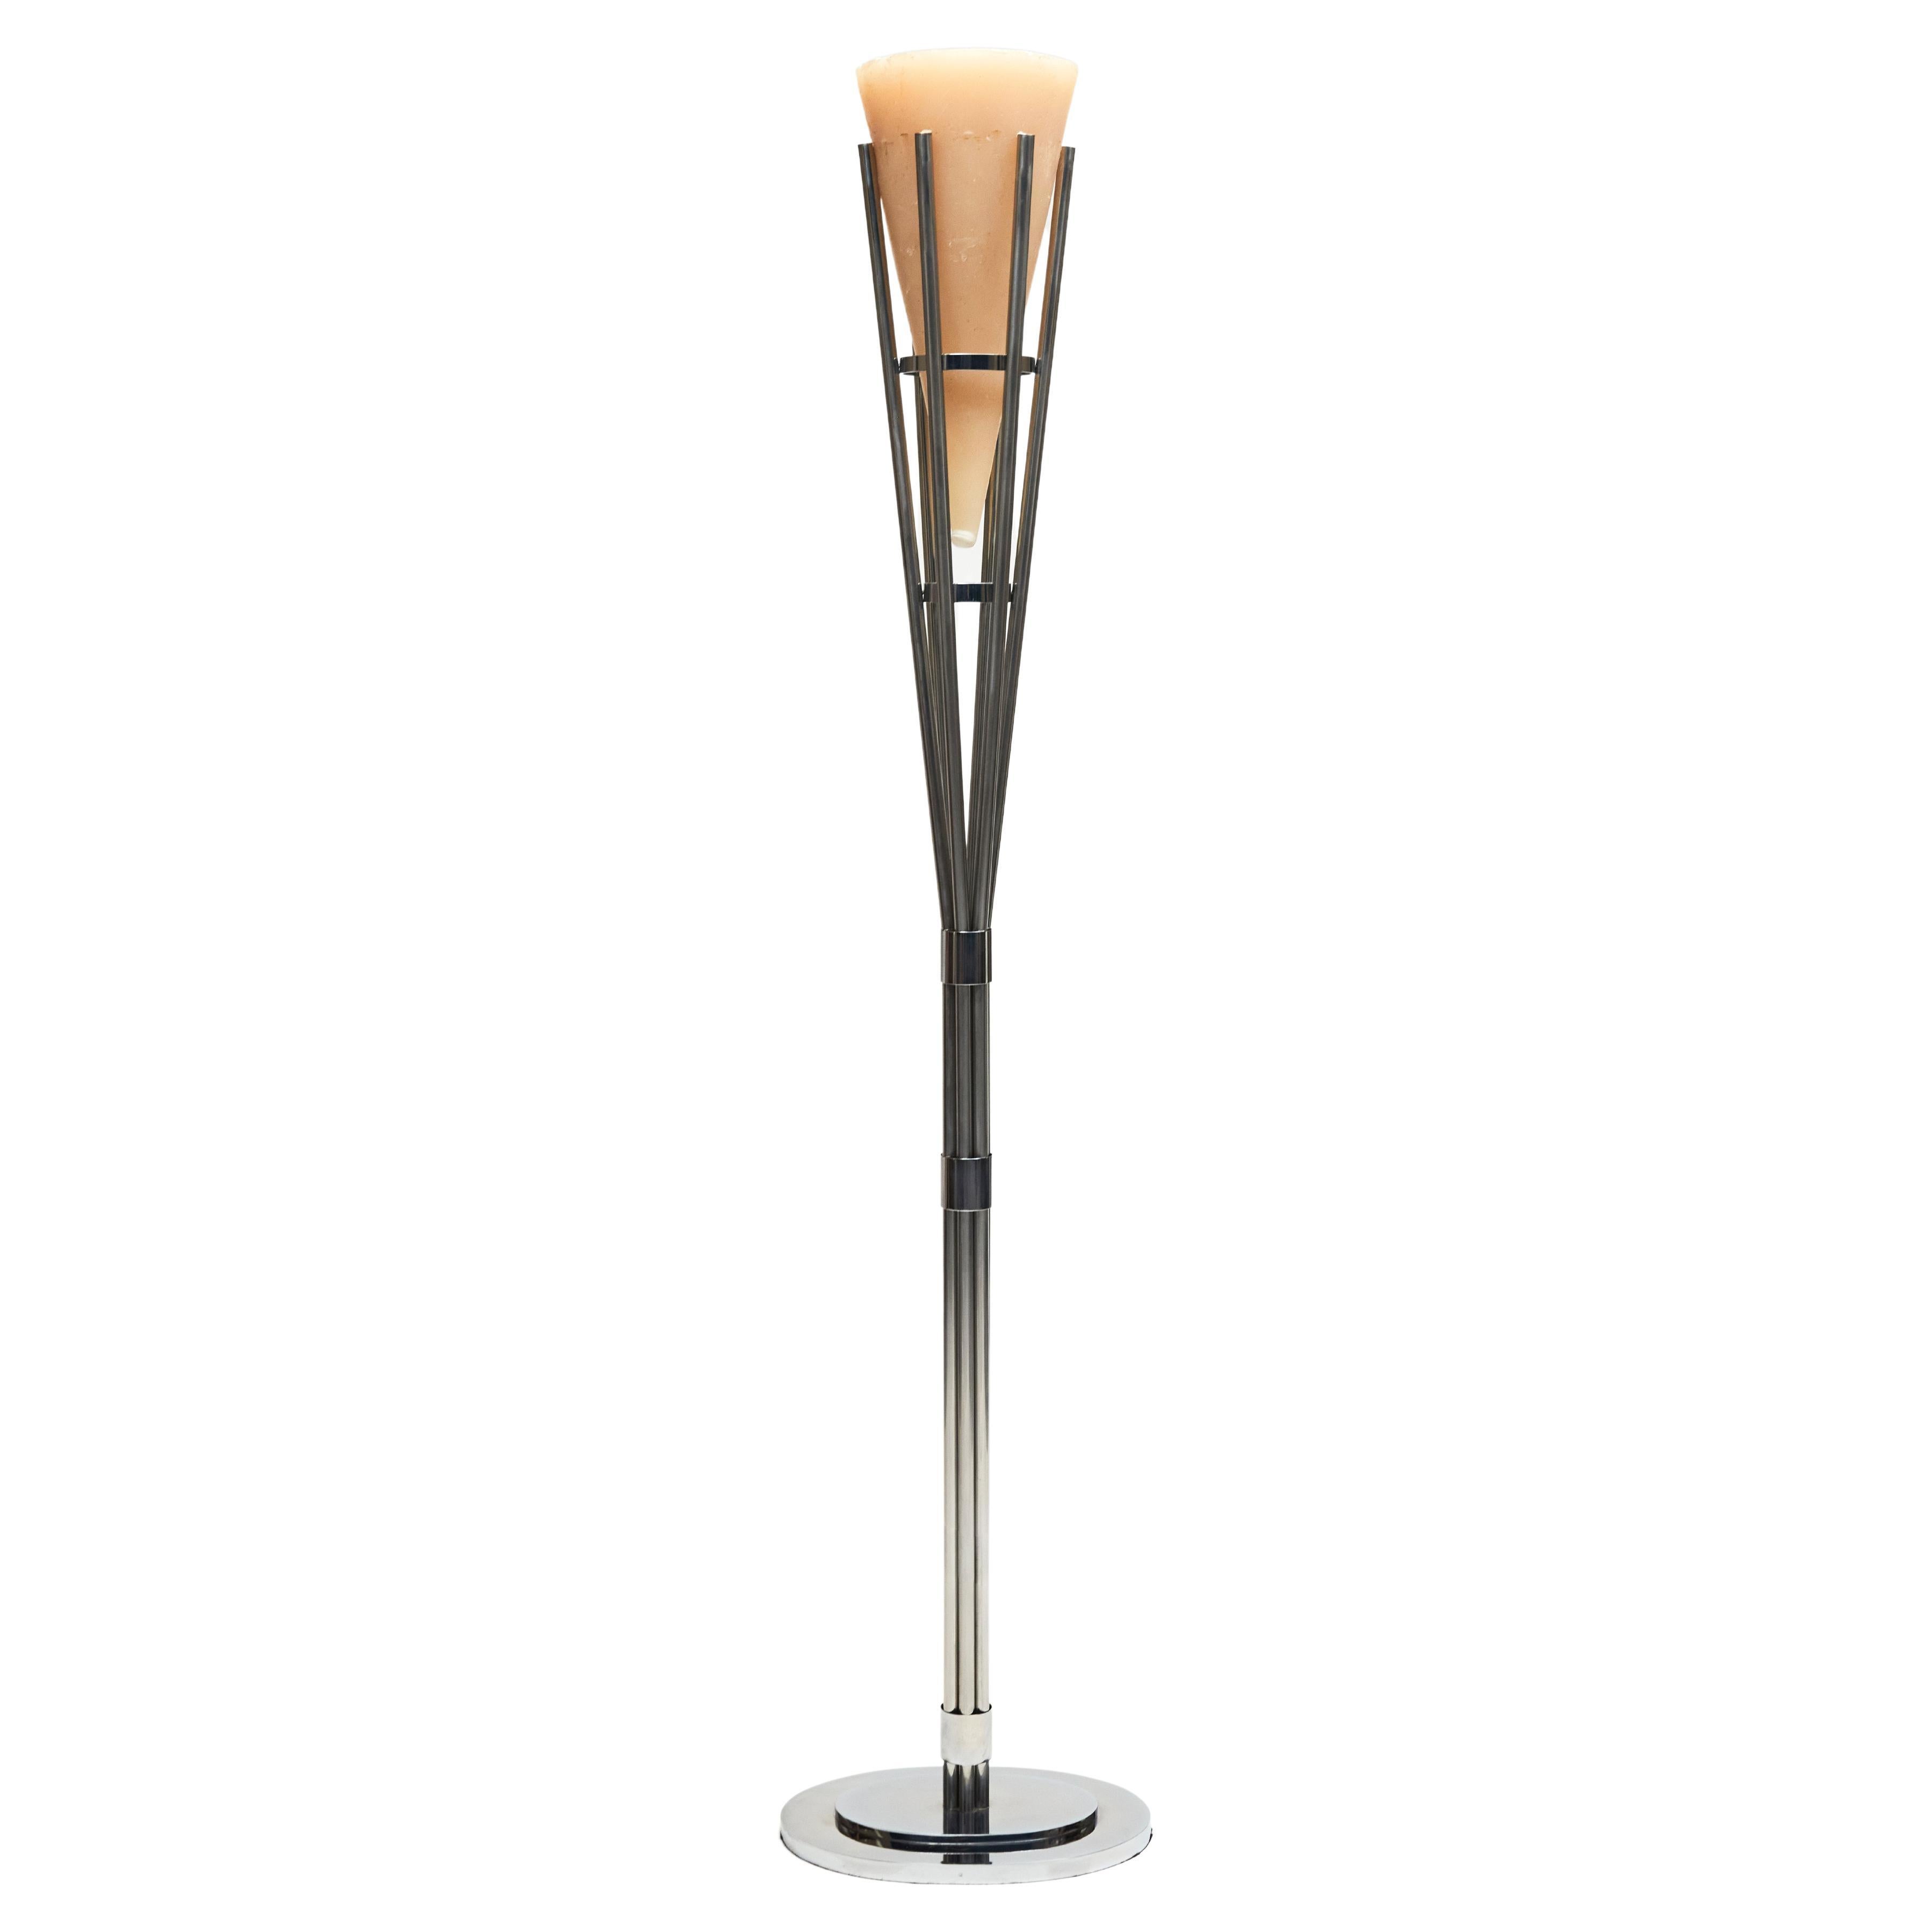 Brazilian Modern Candle Lamp in Silver Metal, 1960's For Sale